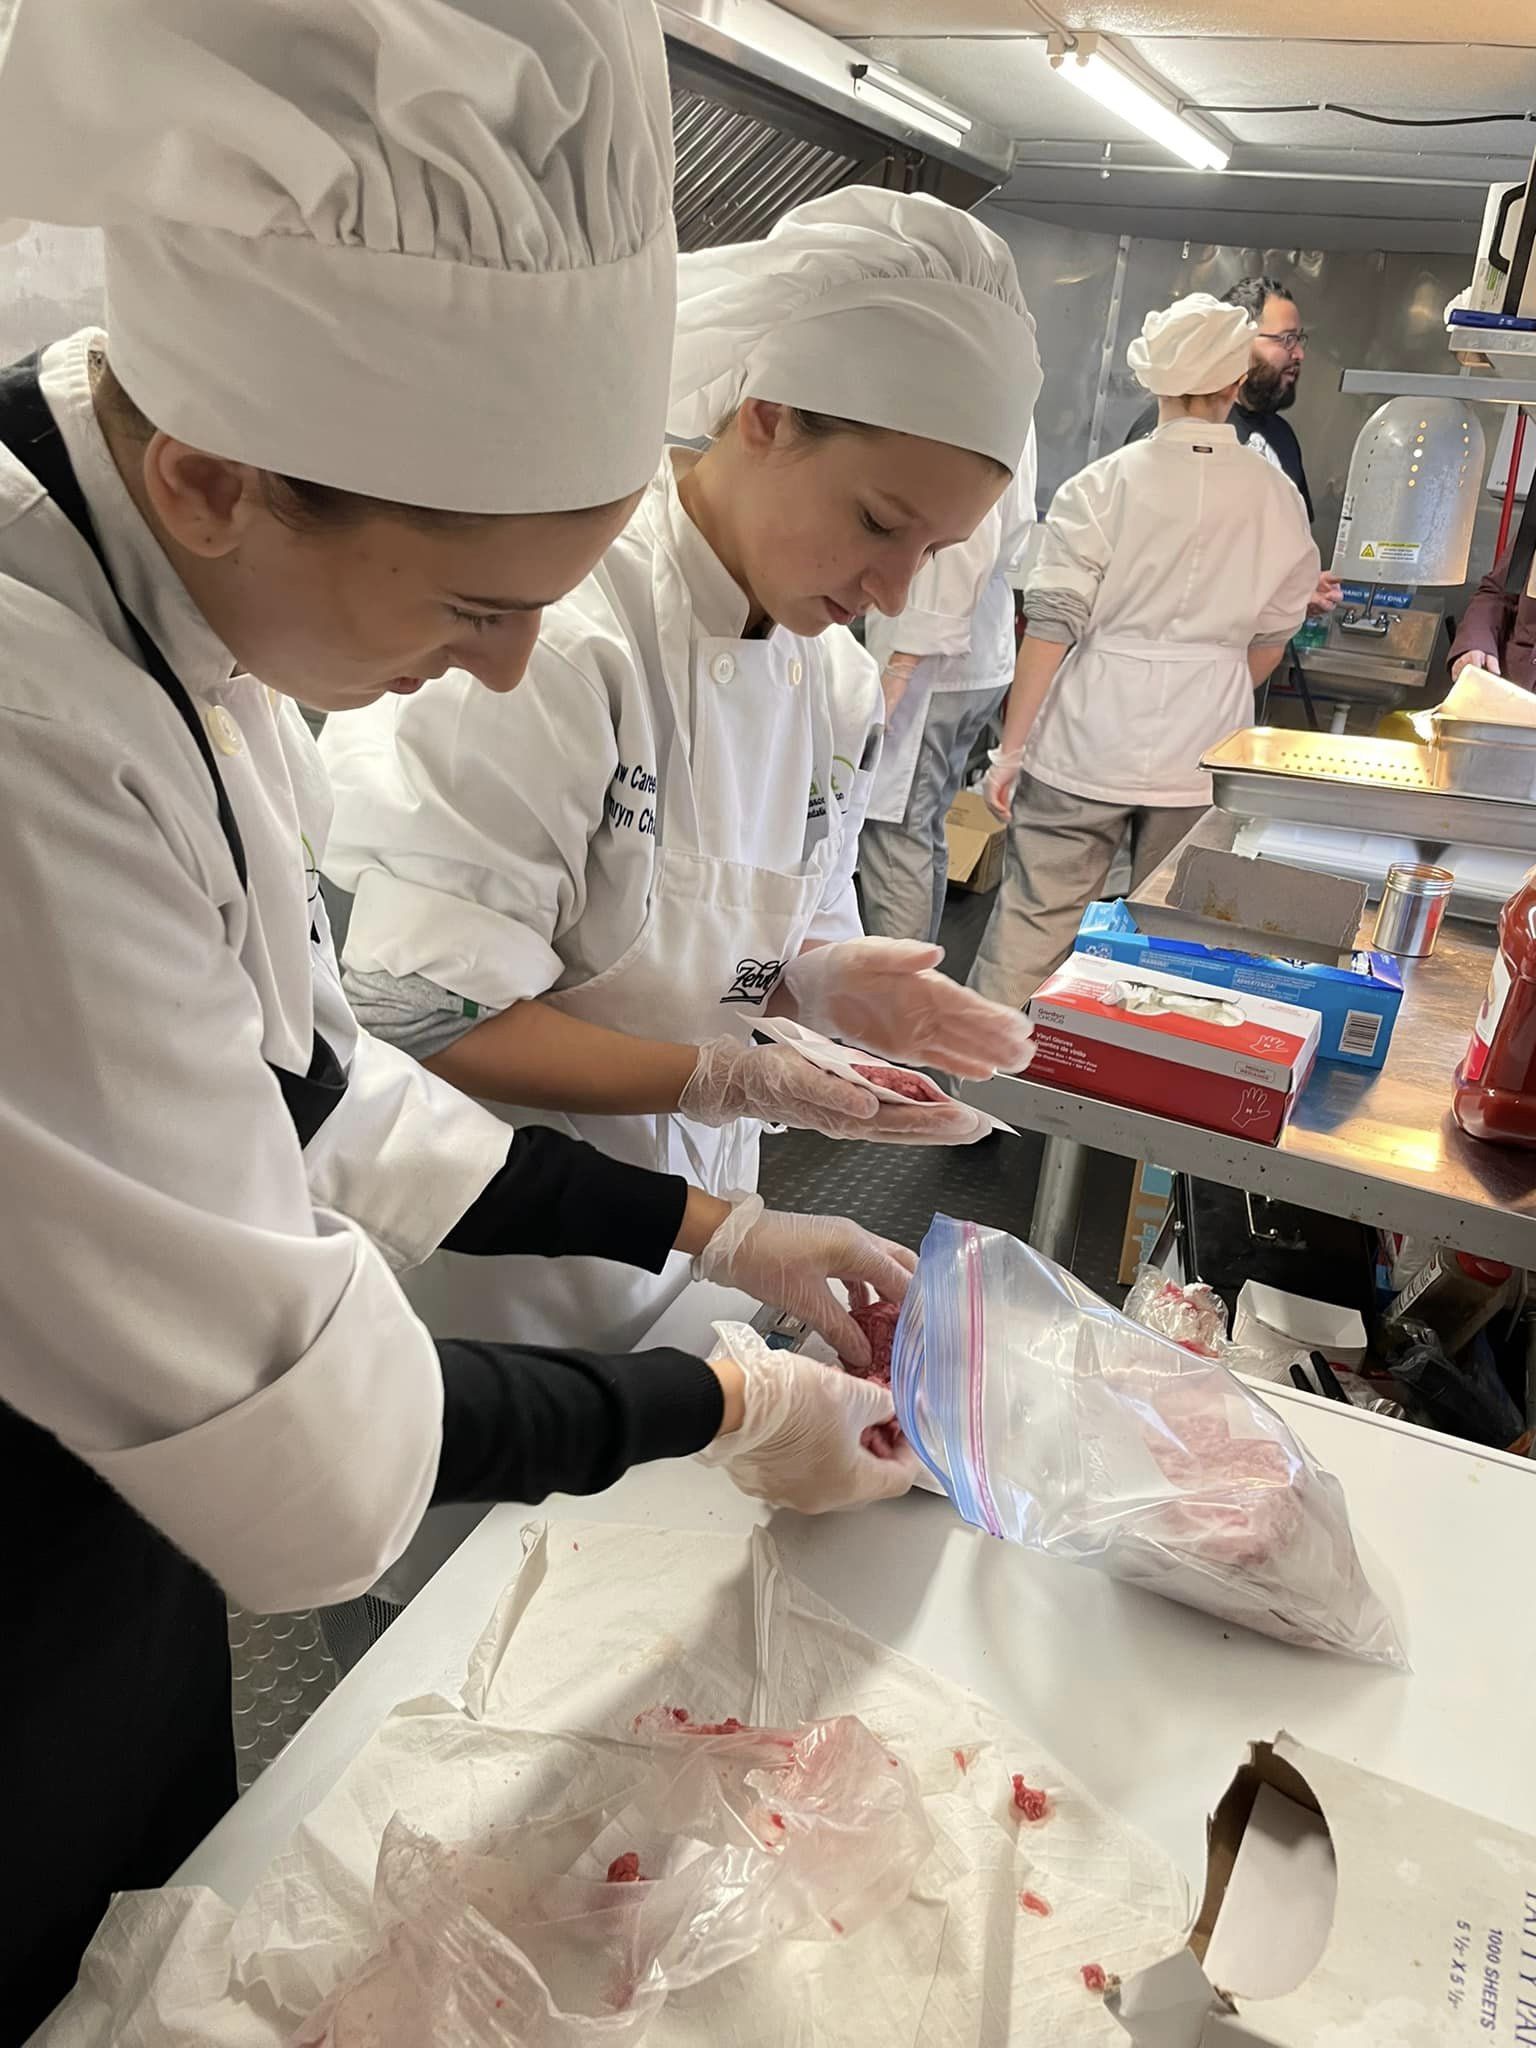 culinary students prepping chicken